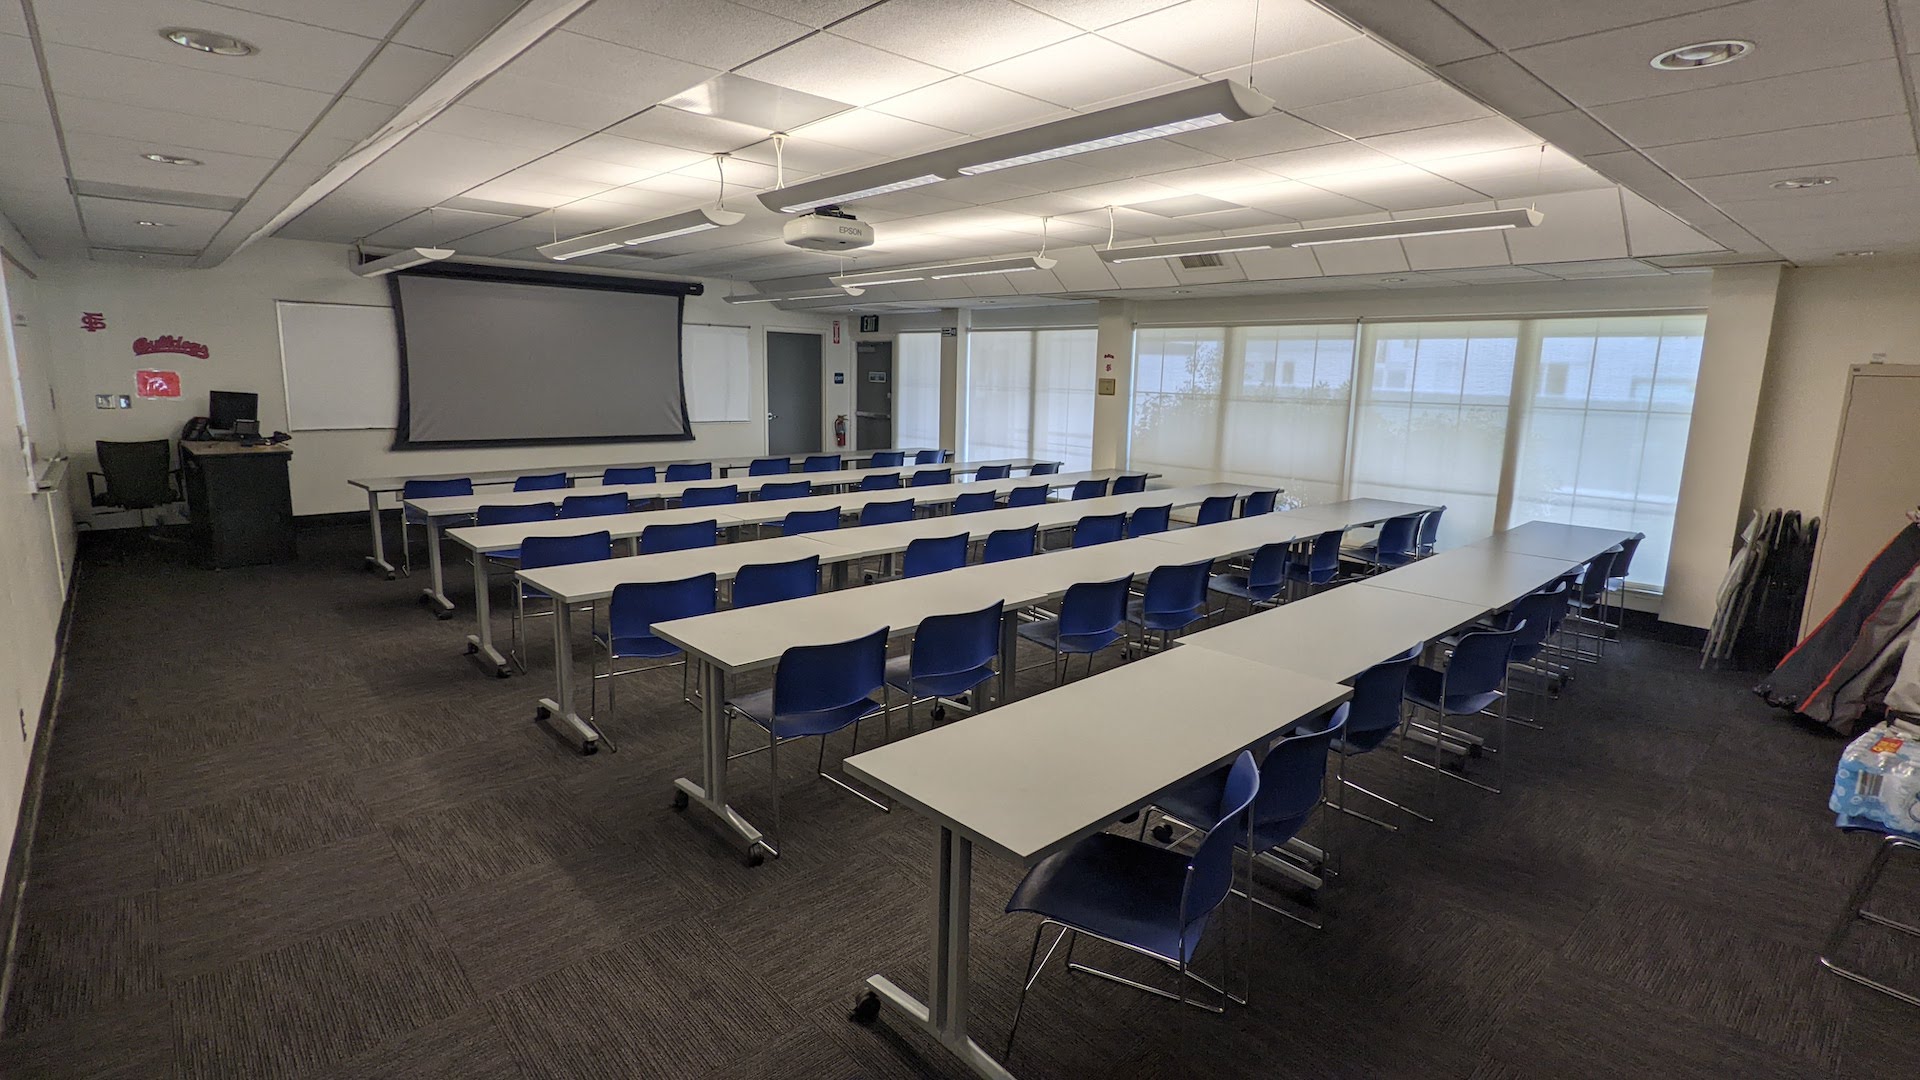 a large classroom with rows of seats and large windows on one side